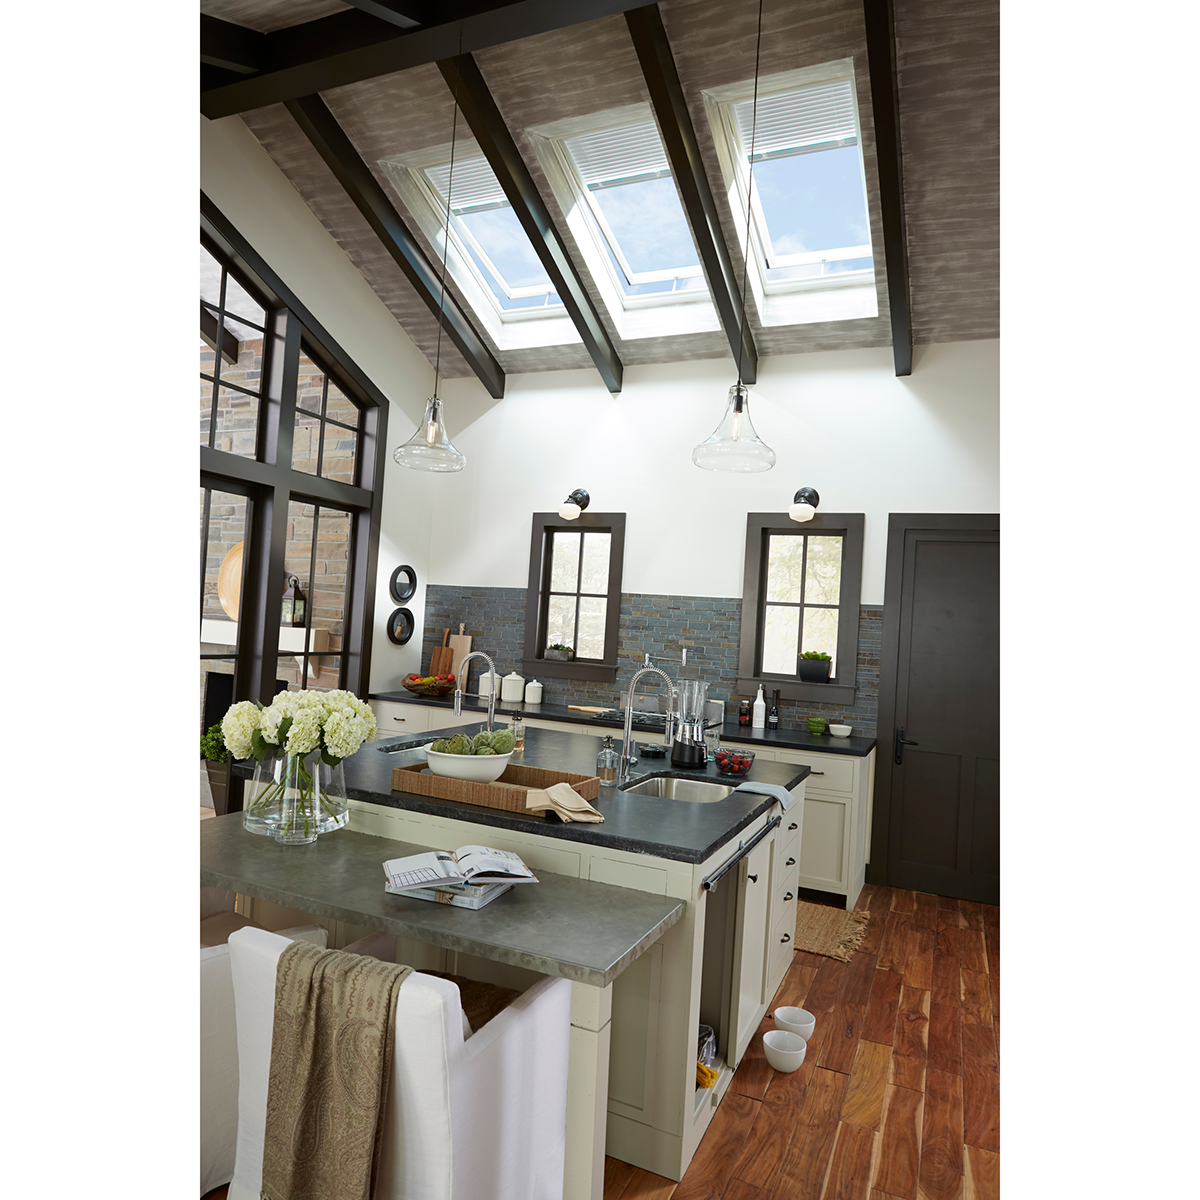 Manual Curb-Mount Skylight with Laminated Low-E3 Glass - 22-1/2 x 46-1/2 inch - VCM 2246